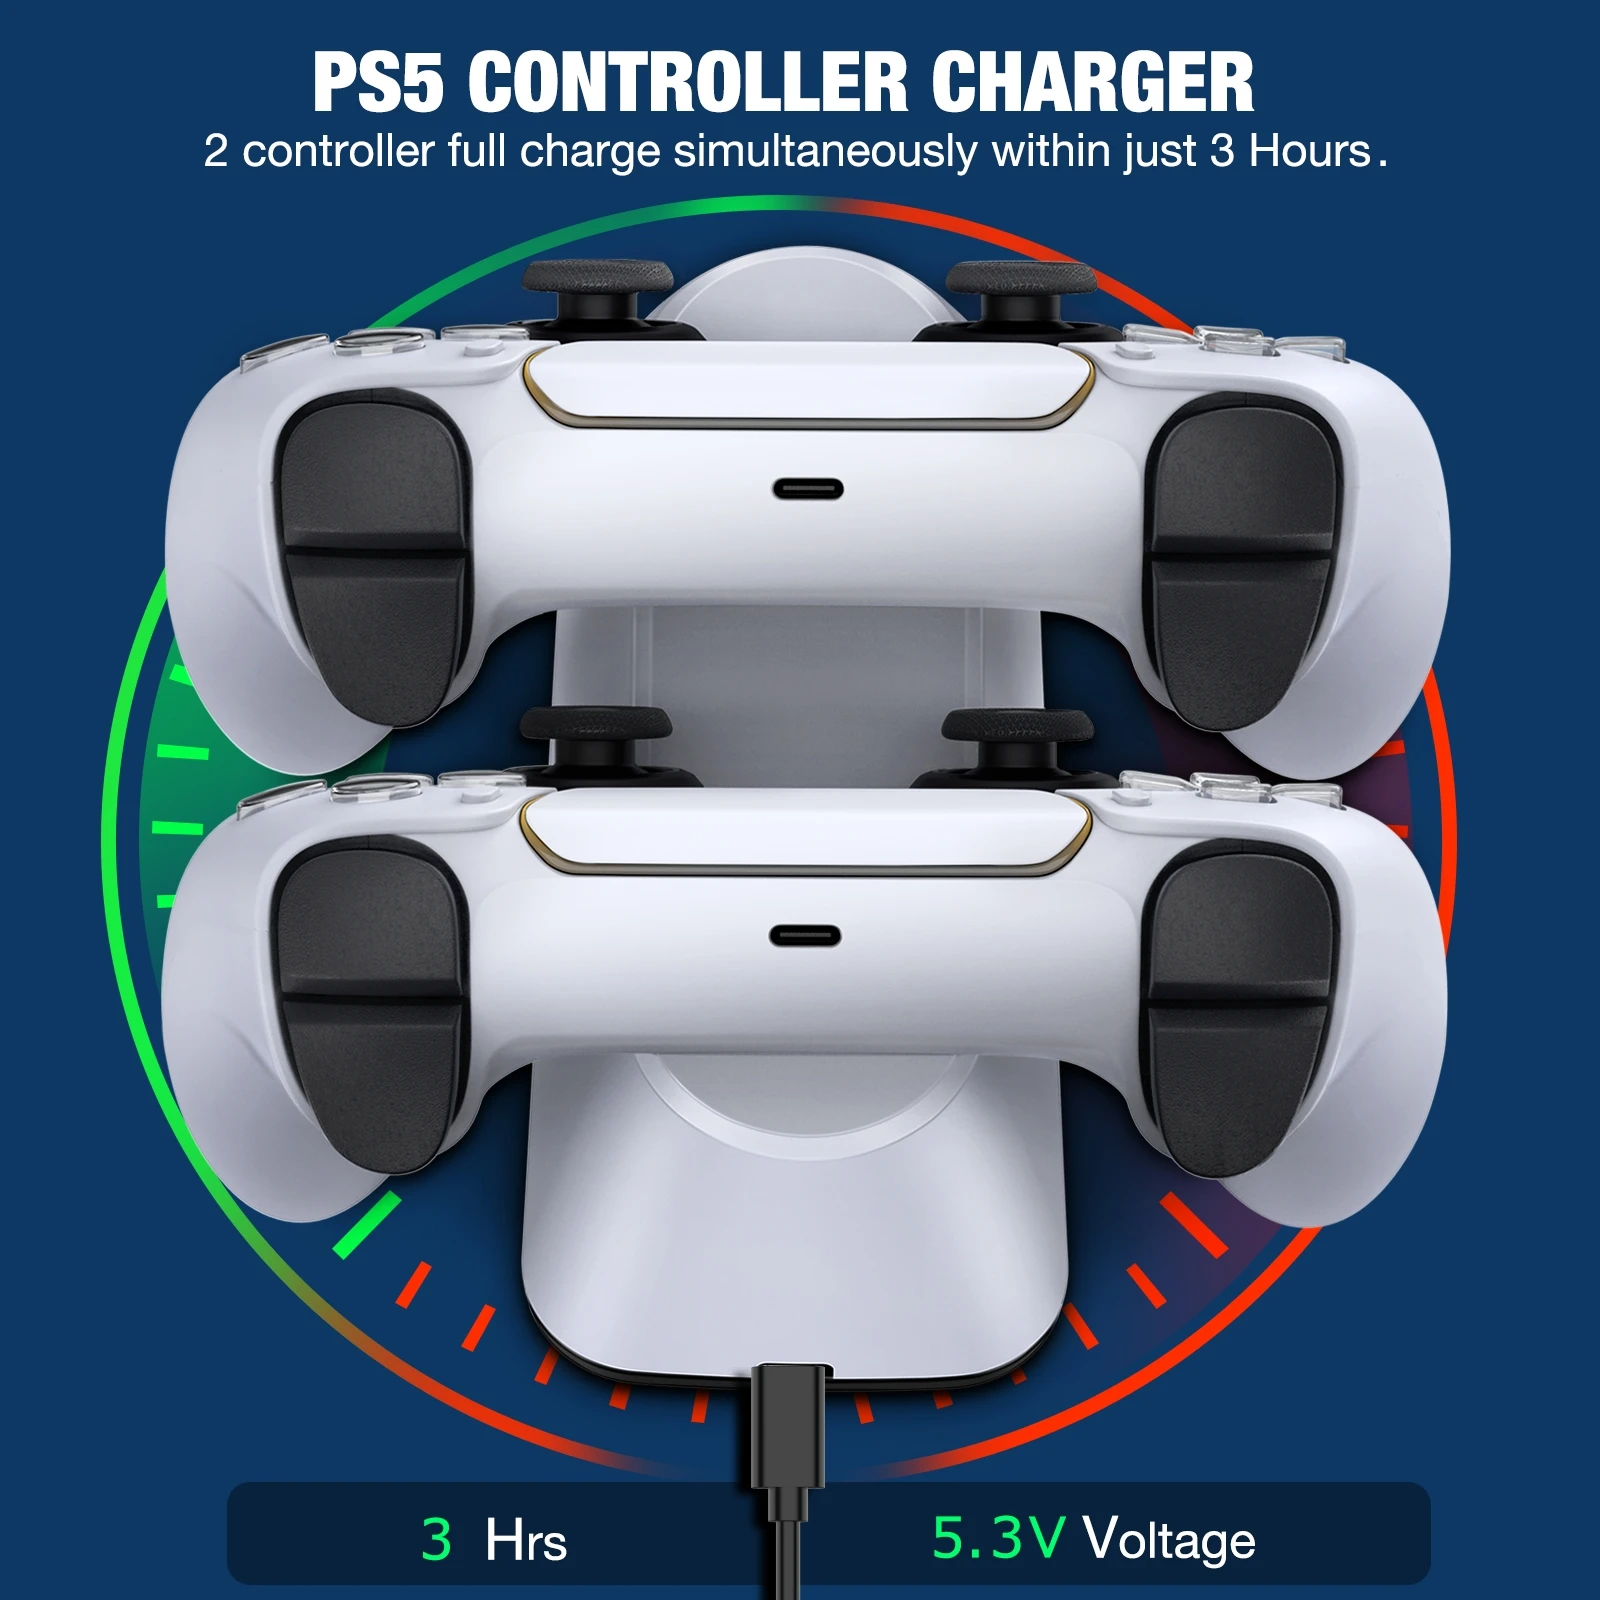 new fast charger for ps5 controller type c dual charging dock station for ps5 accessories charger for sony playstation 5 gamepad free global shipping